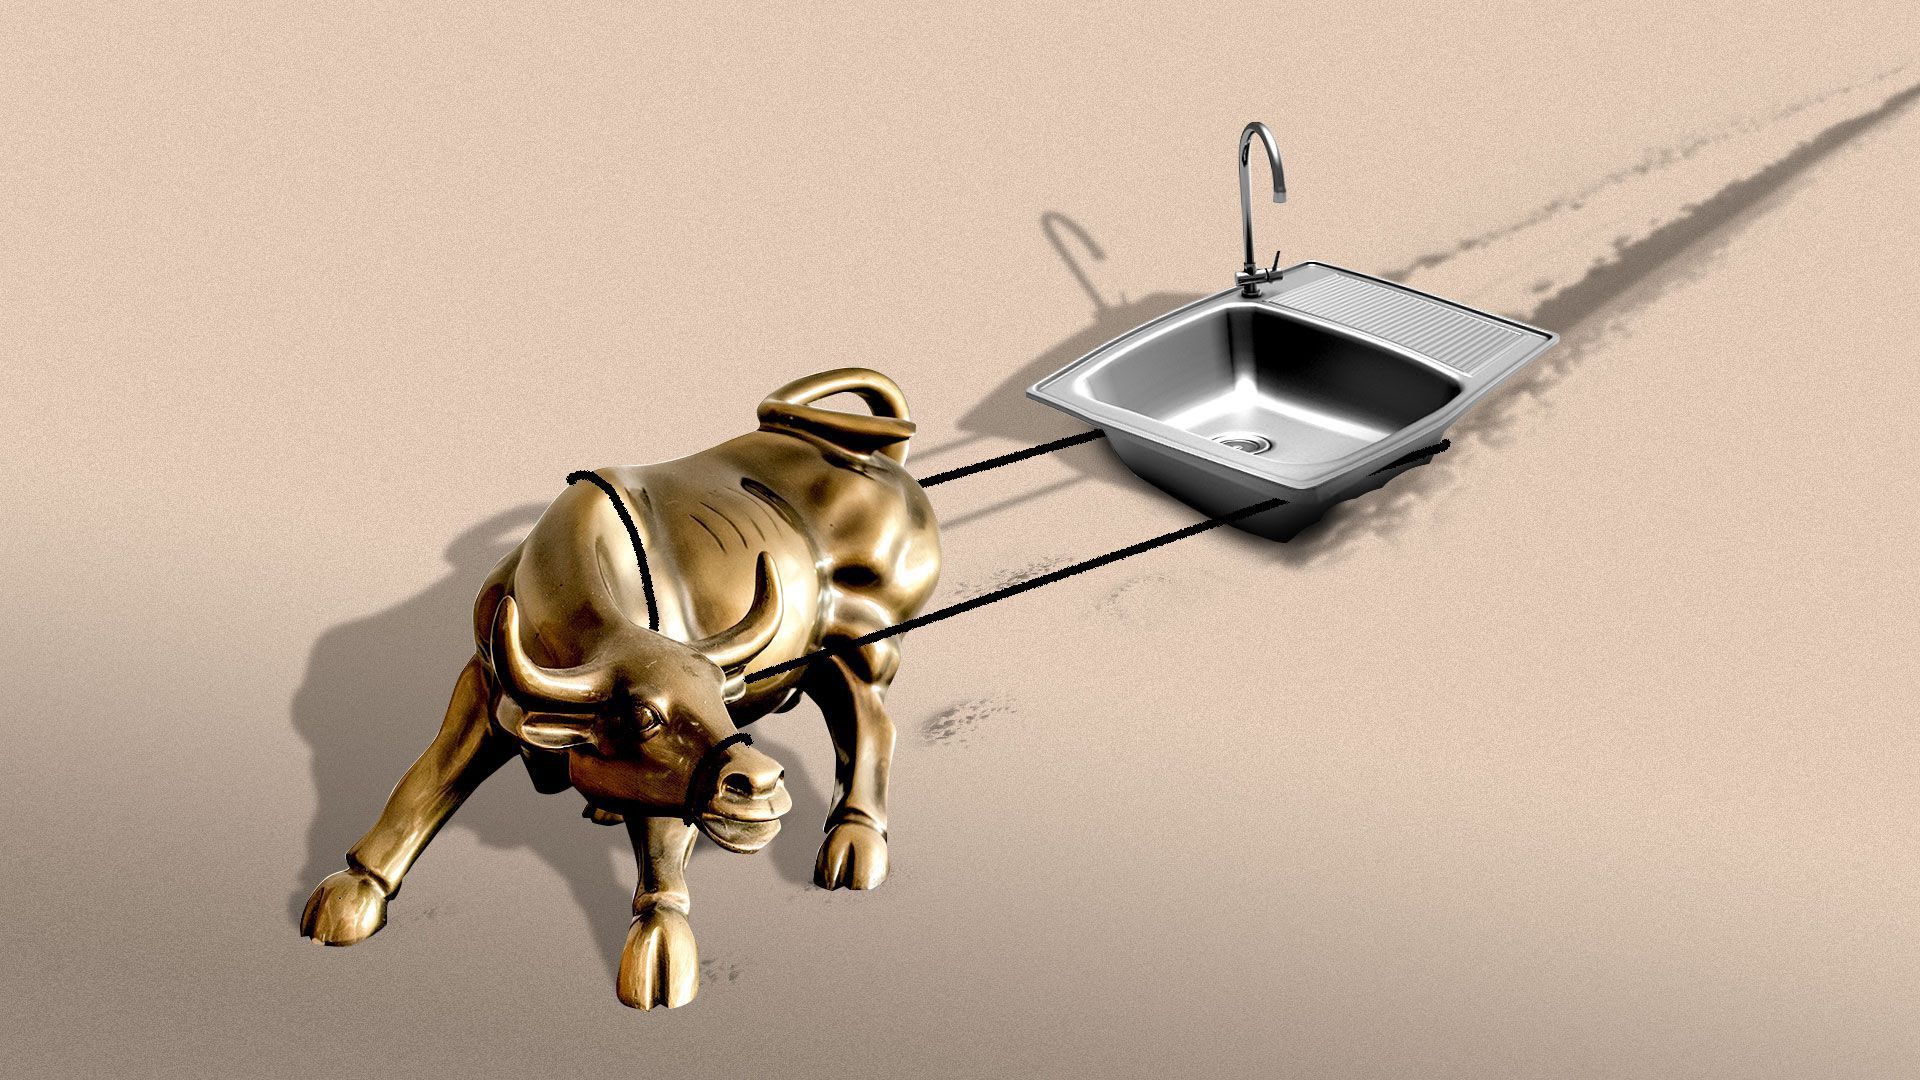 An illustration of a bull pulling a kitchen sink